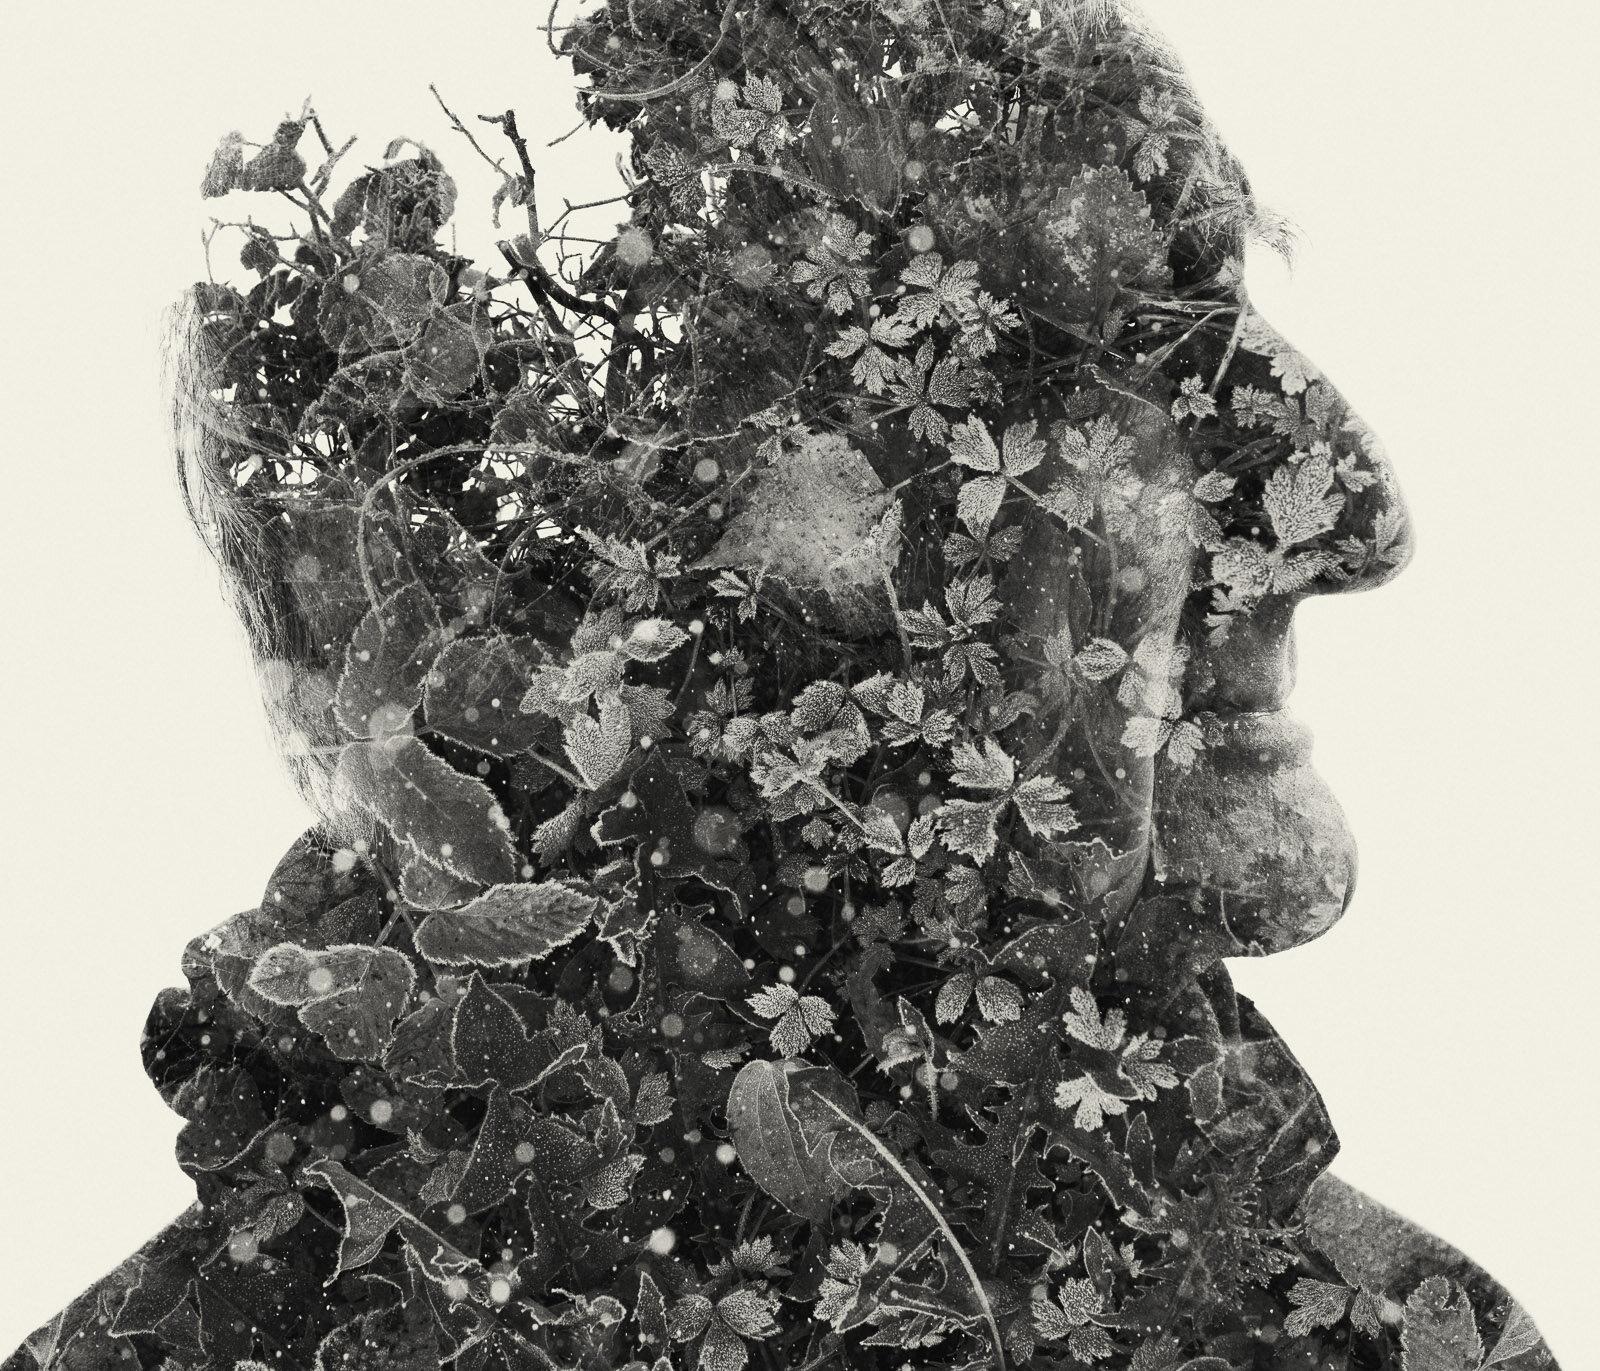 Christoffer Relander Black and White Photograph - The ancestor - black and white portrait and nature multi exposure photograph